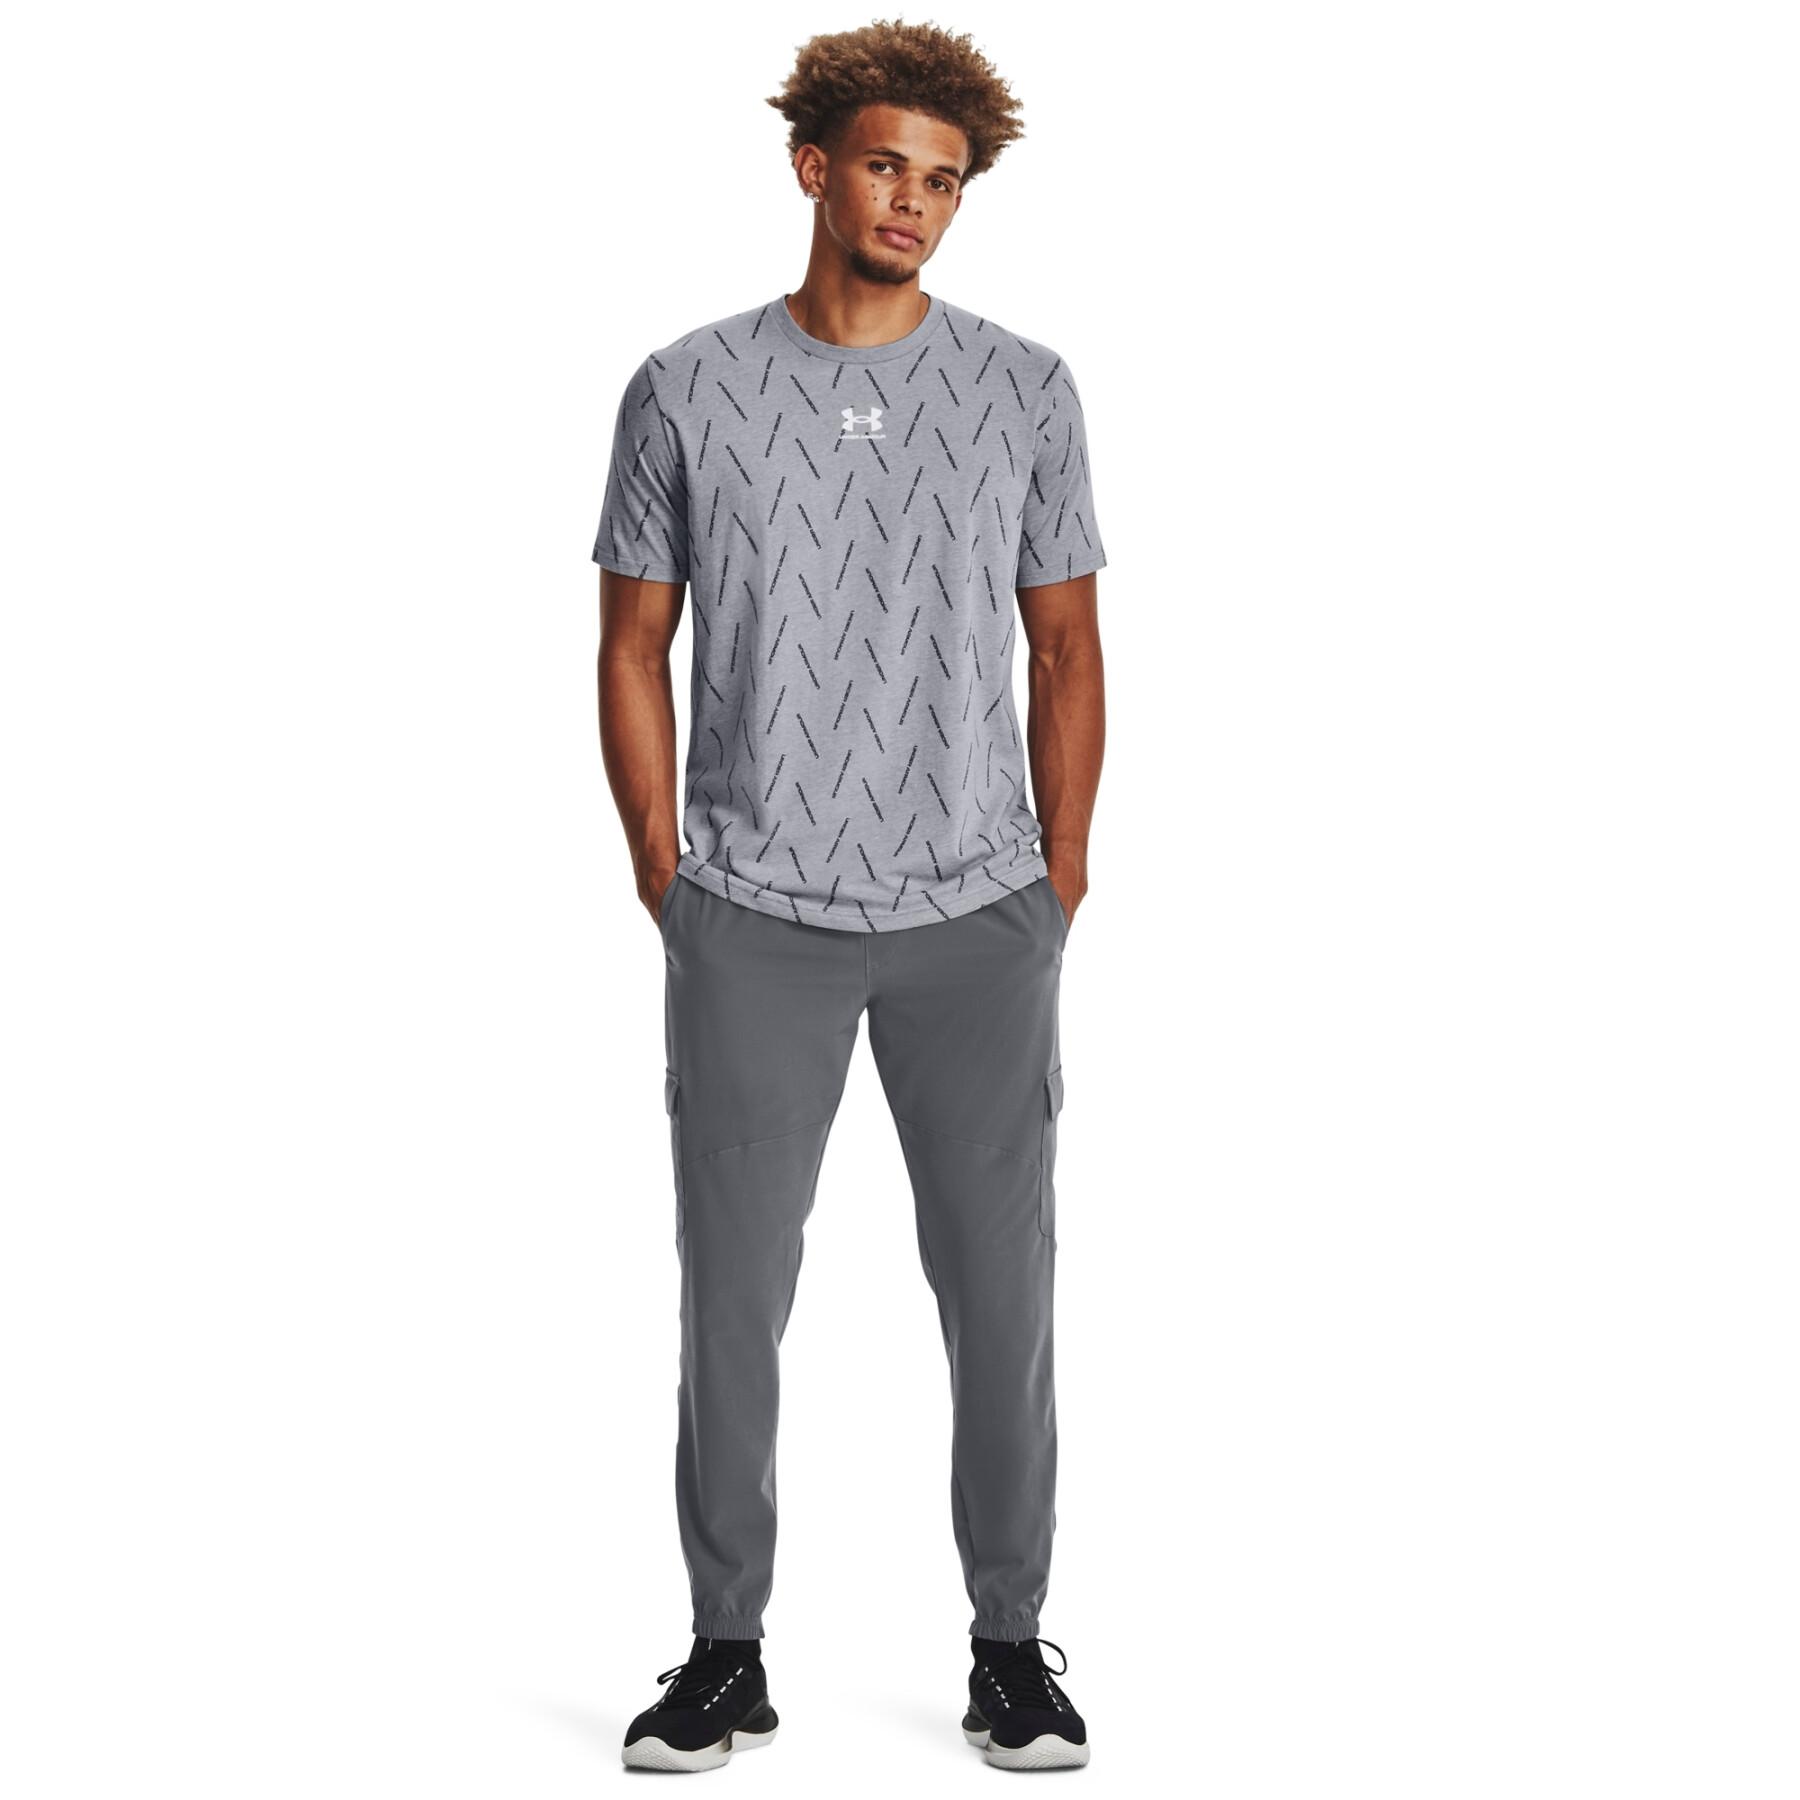 Cargo pants Under Armour Stretch Woven